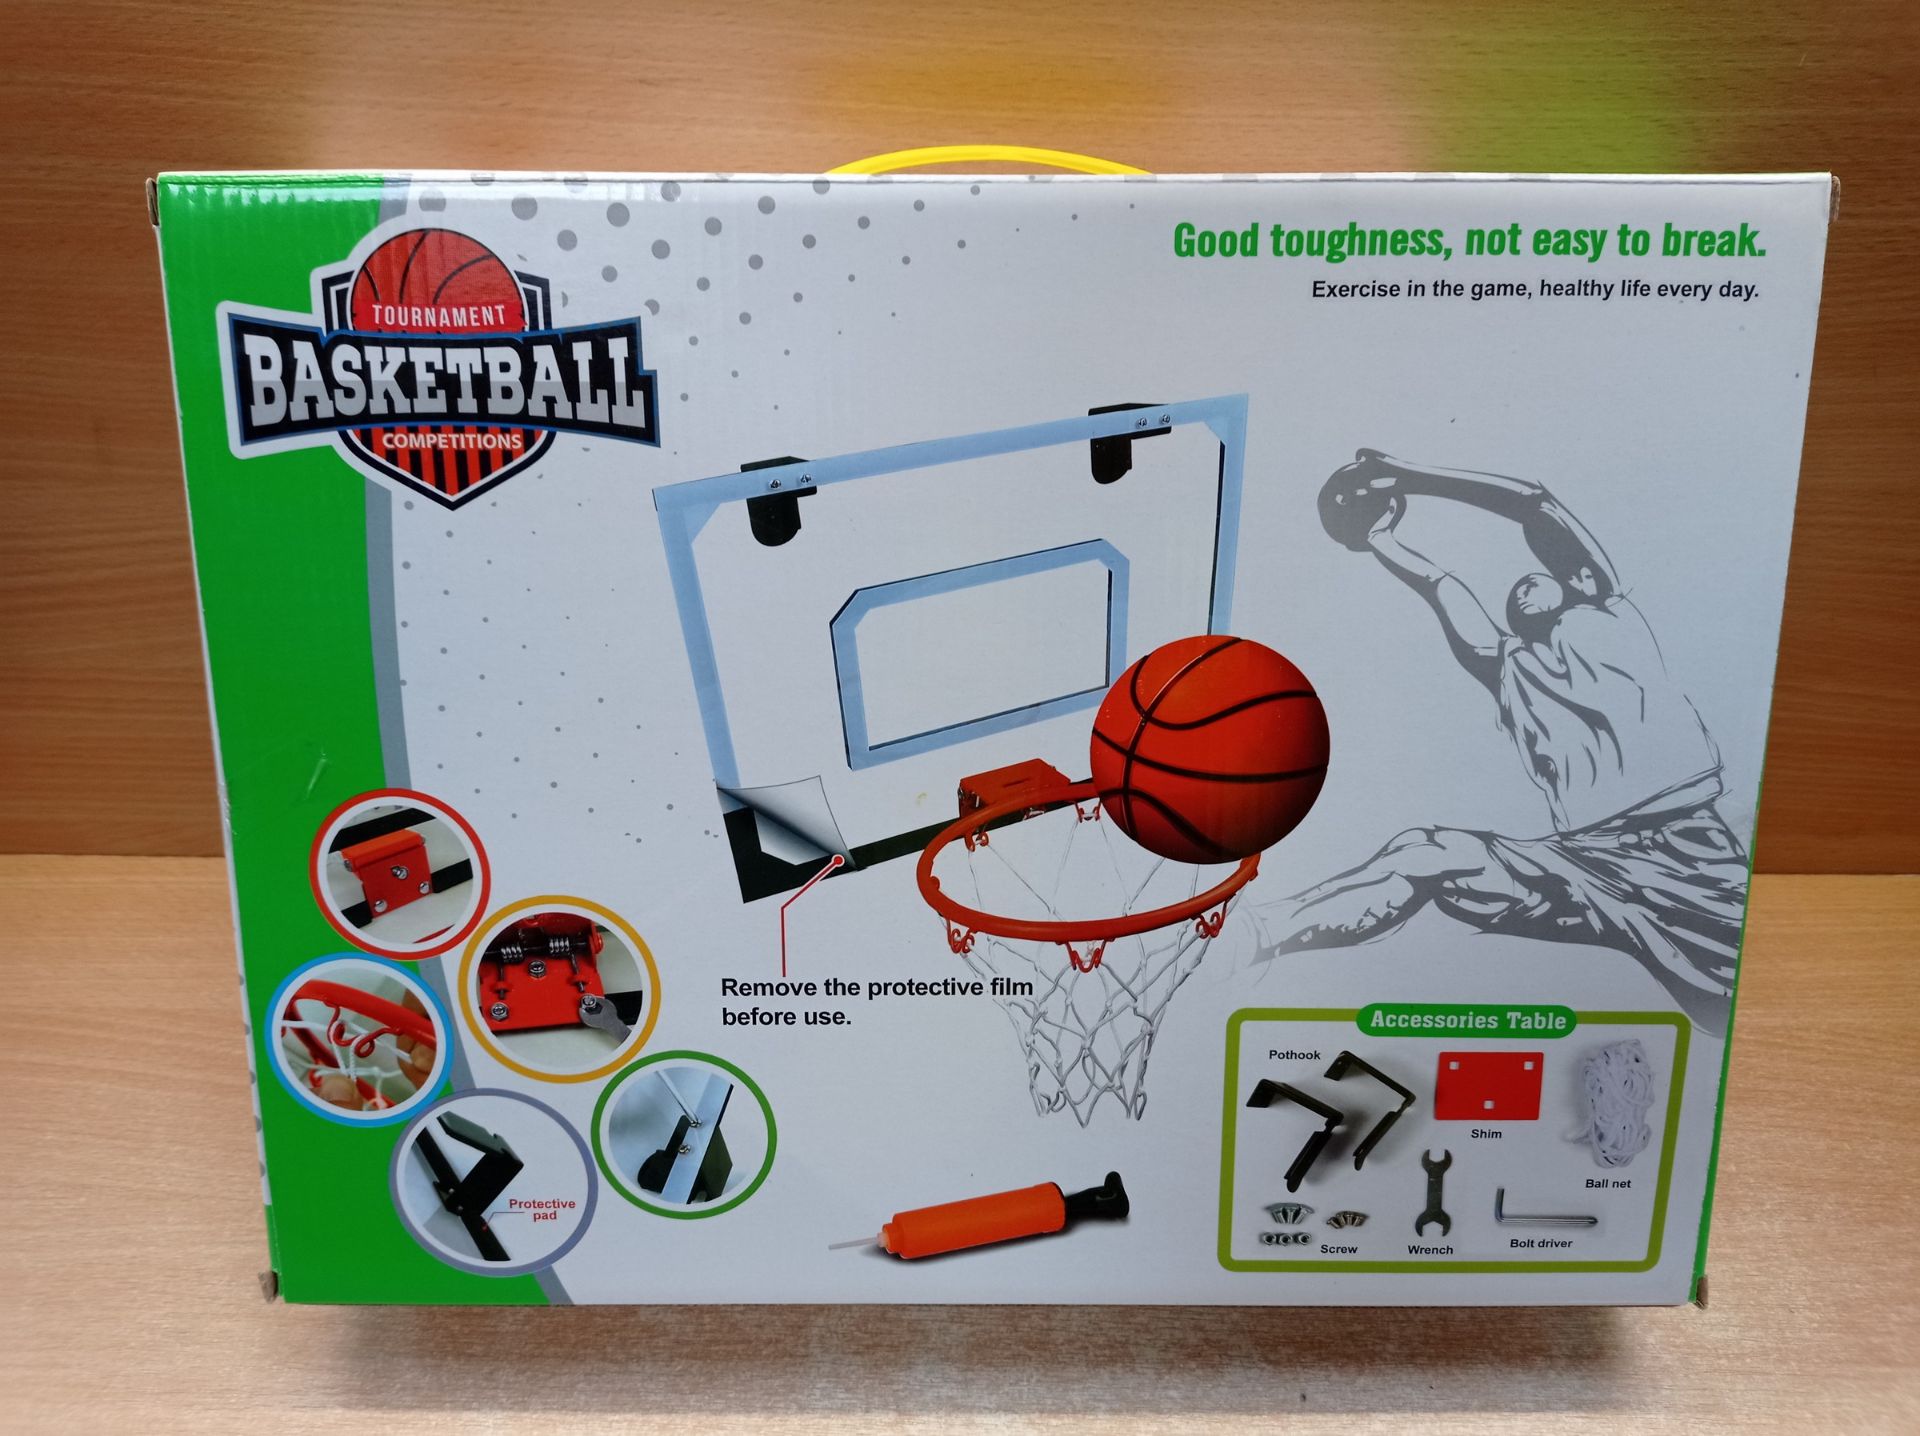 RRP £31.80 STAY GENT Mini Basketball Hoop for Kids and Adults - Image 2 of 2